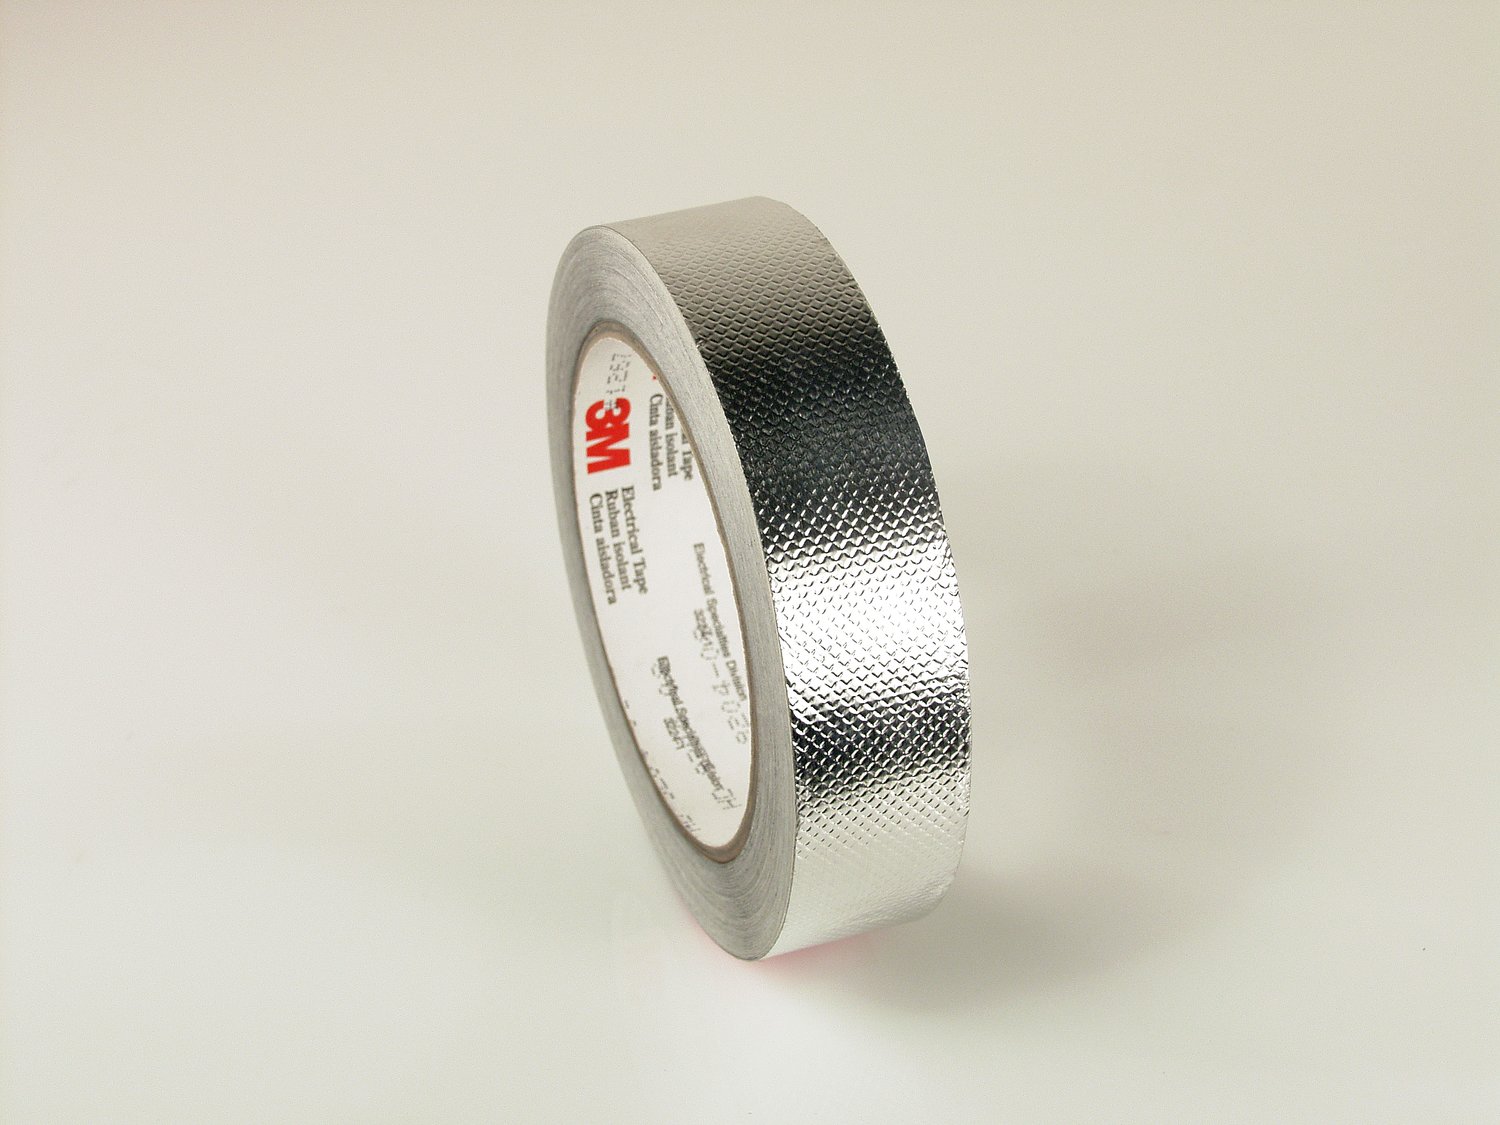 7010320433 - 3M Embossed Aluminum Foil EMI Shielding Tape 1267, 23 in x 60 yd, 3 in
Paper Core, Untrimmed Potted Log Roll, 1 Roll/Case